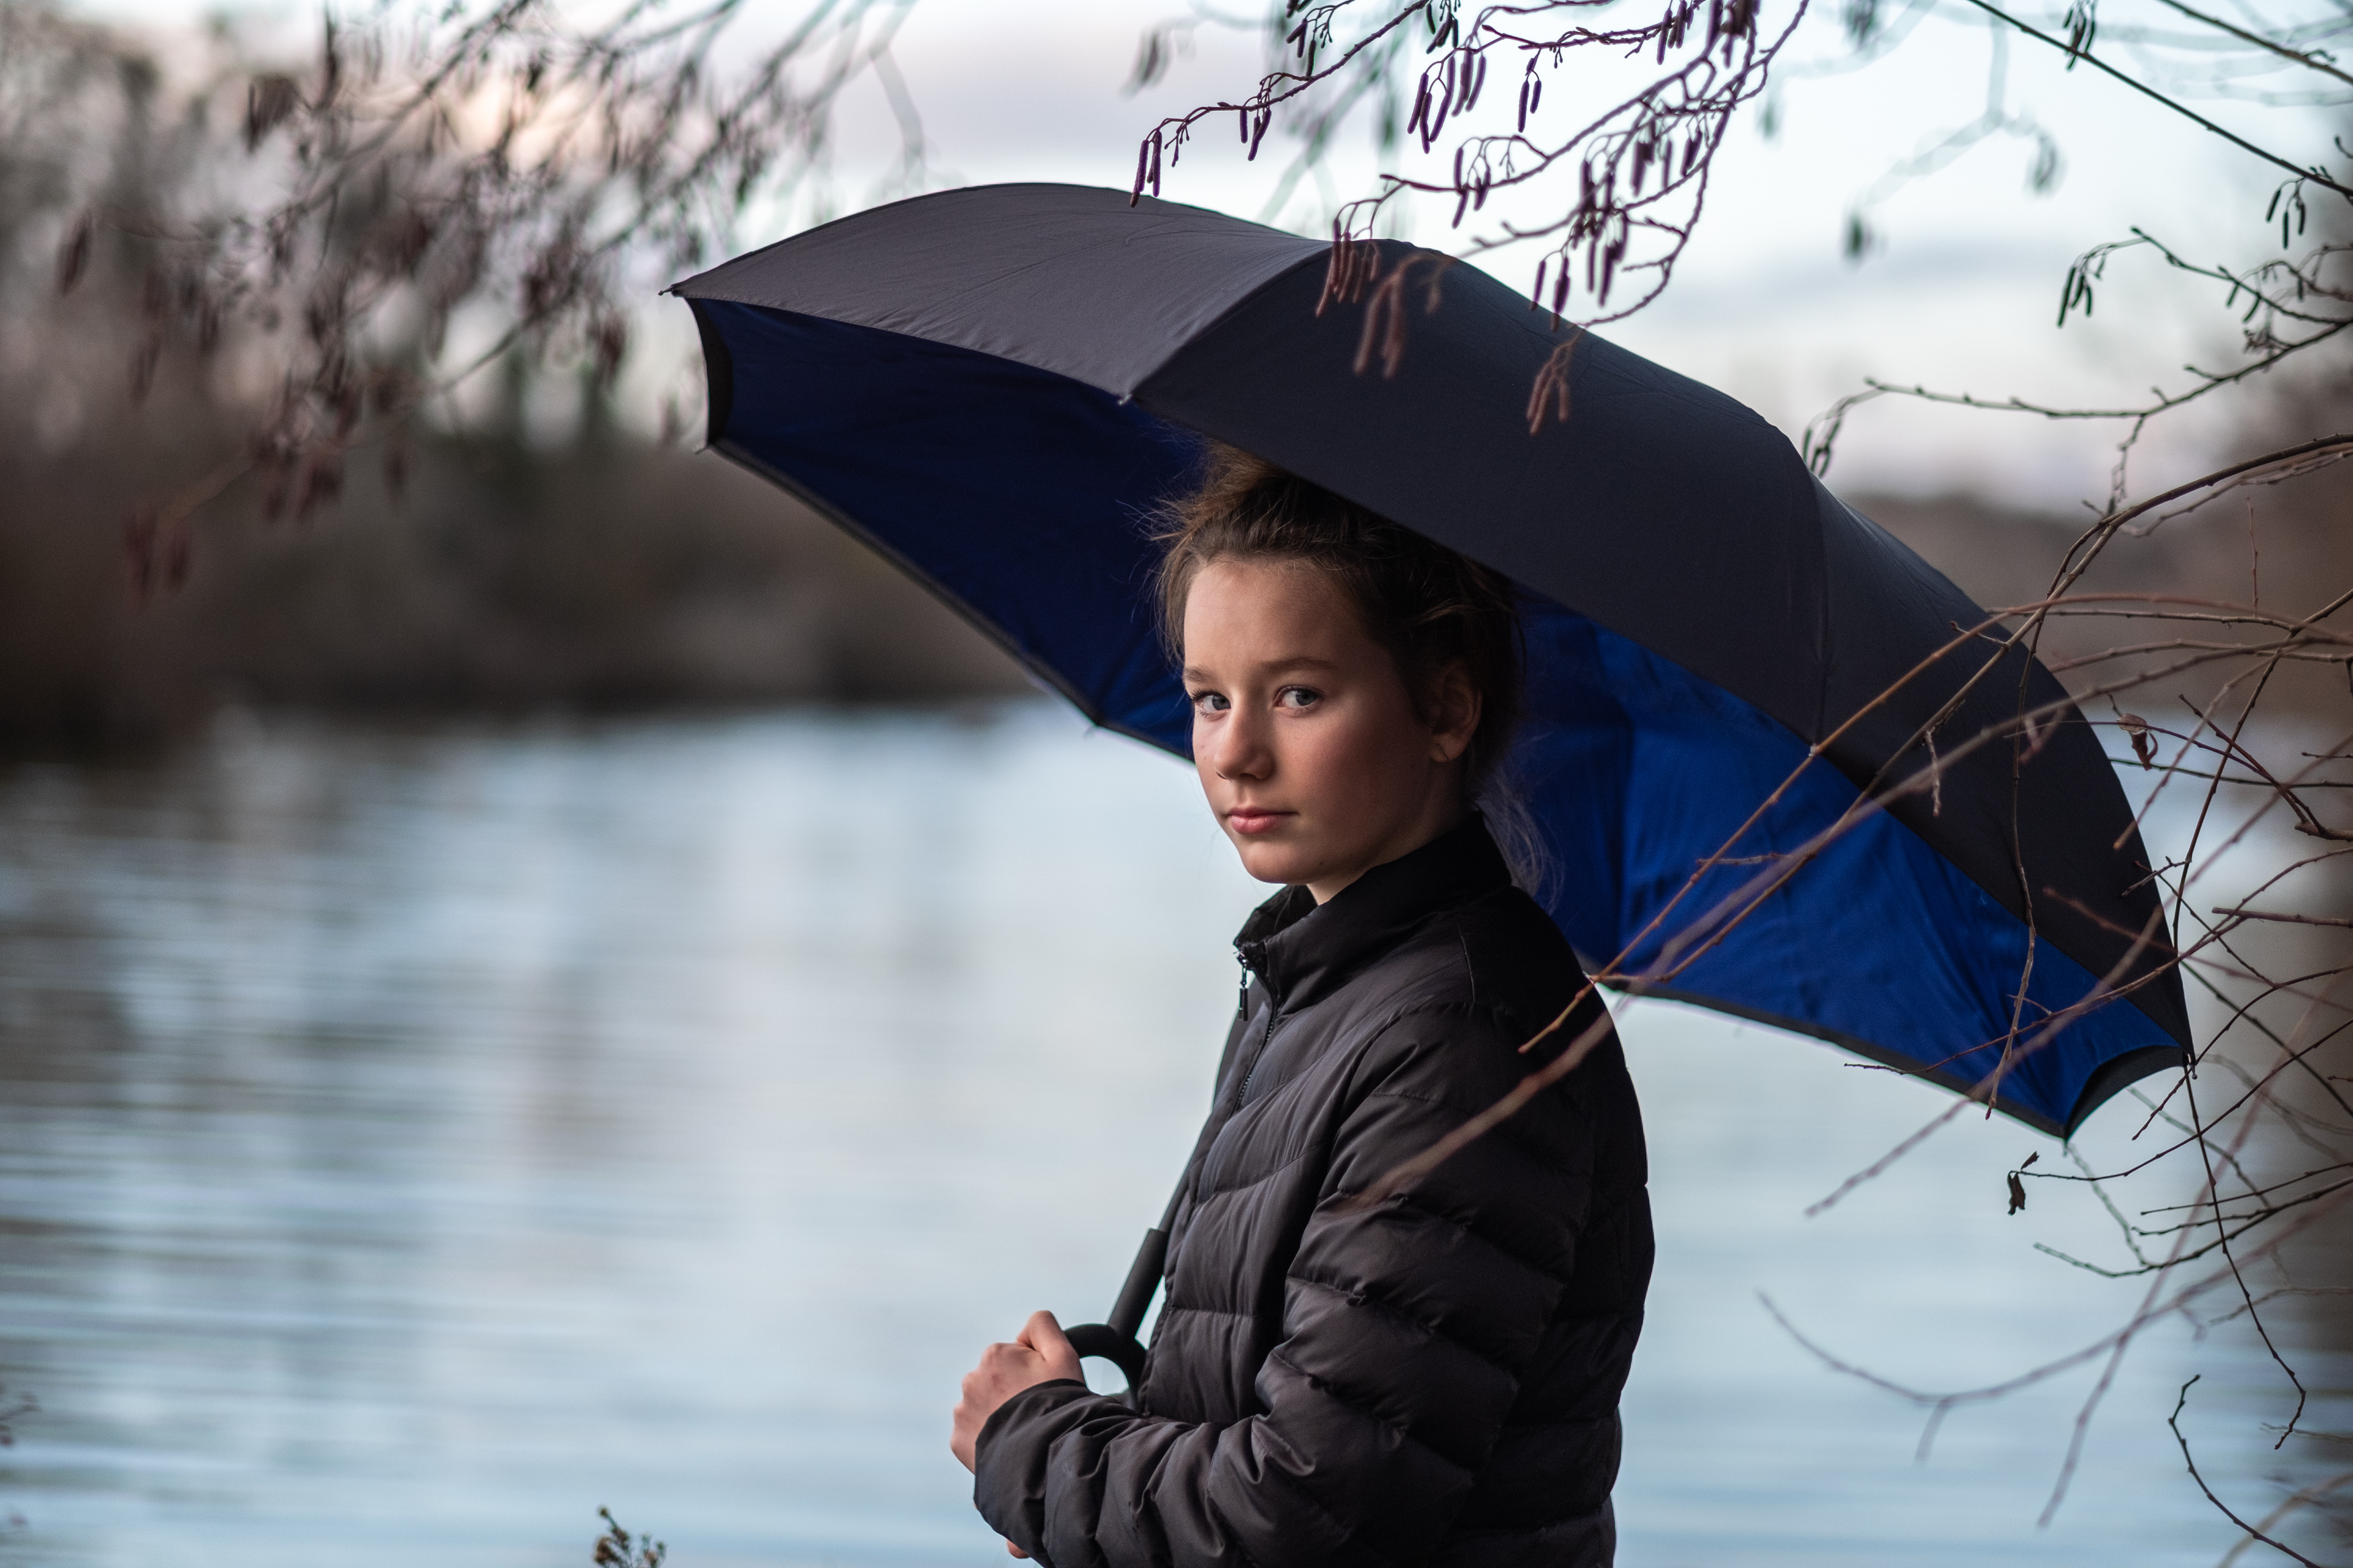 Outdoor portrait of a young girl with an umbrella